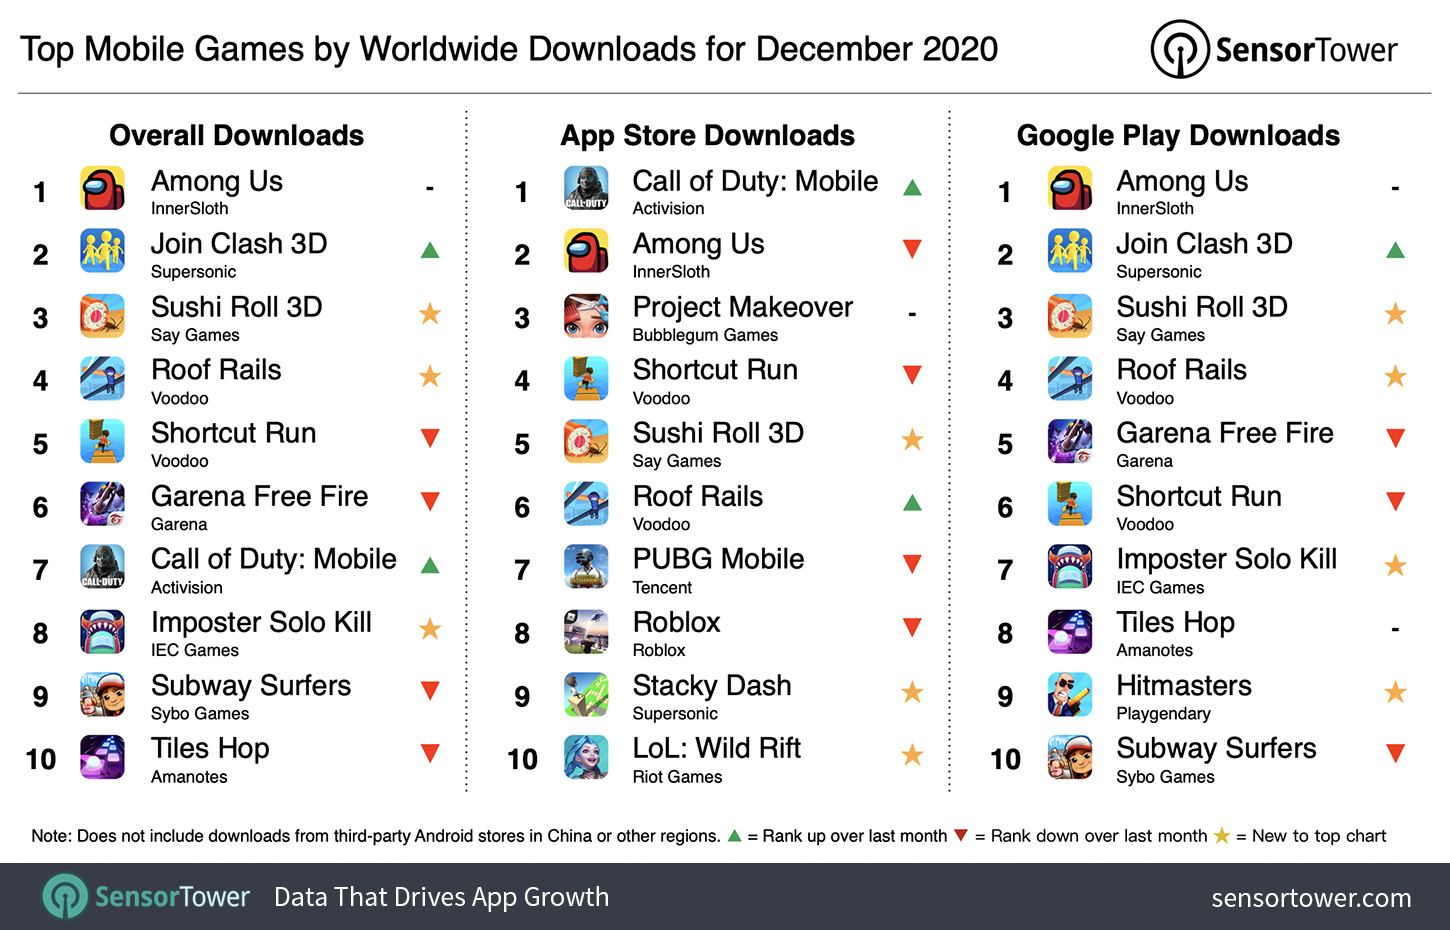 Top Mobile Games Worldwide for December 2020 by Downloads